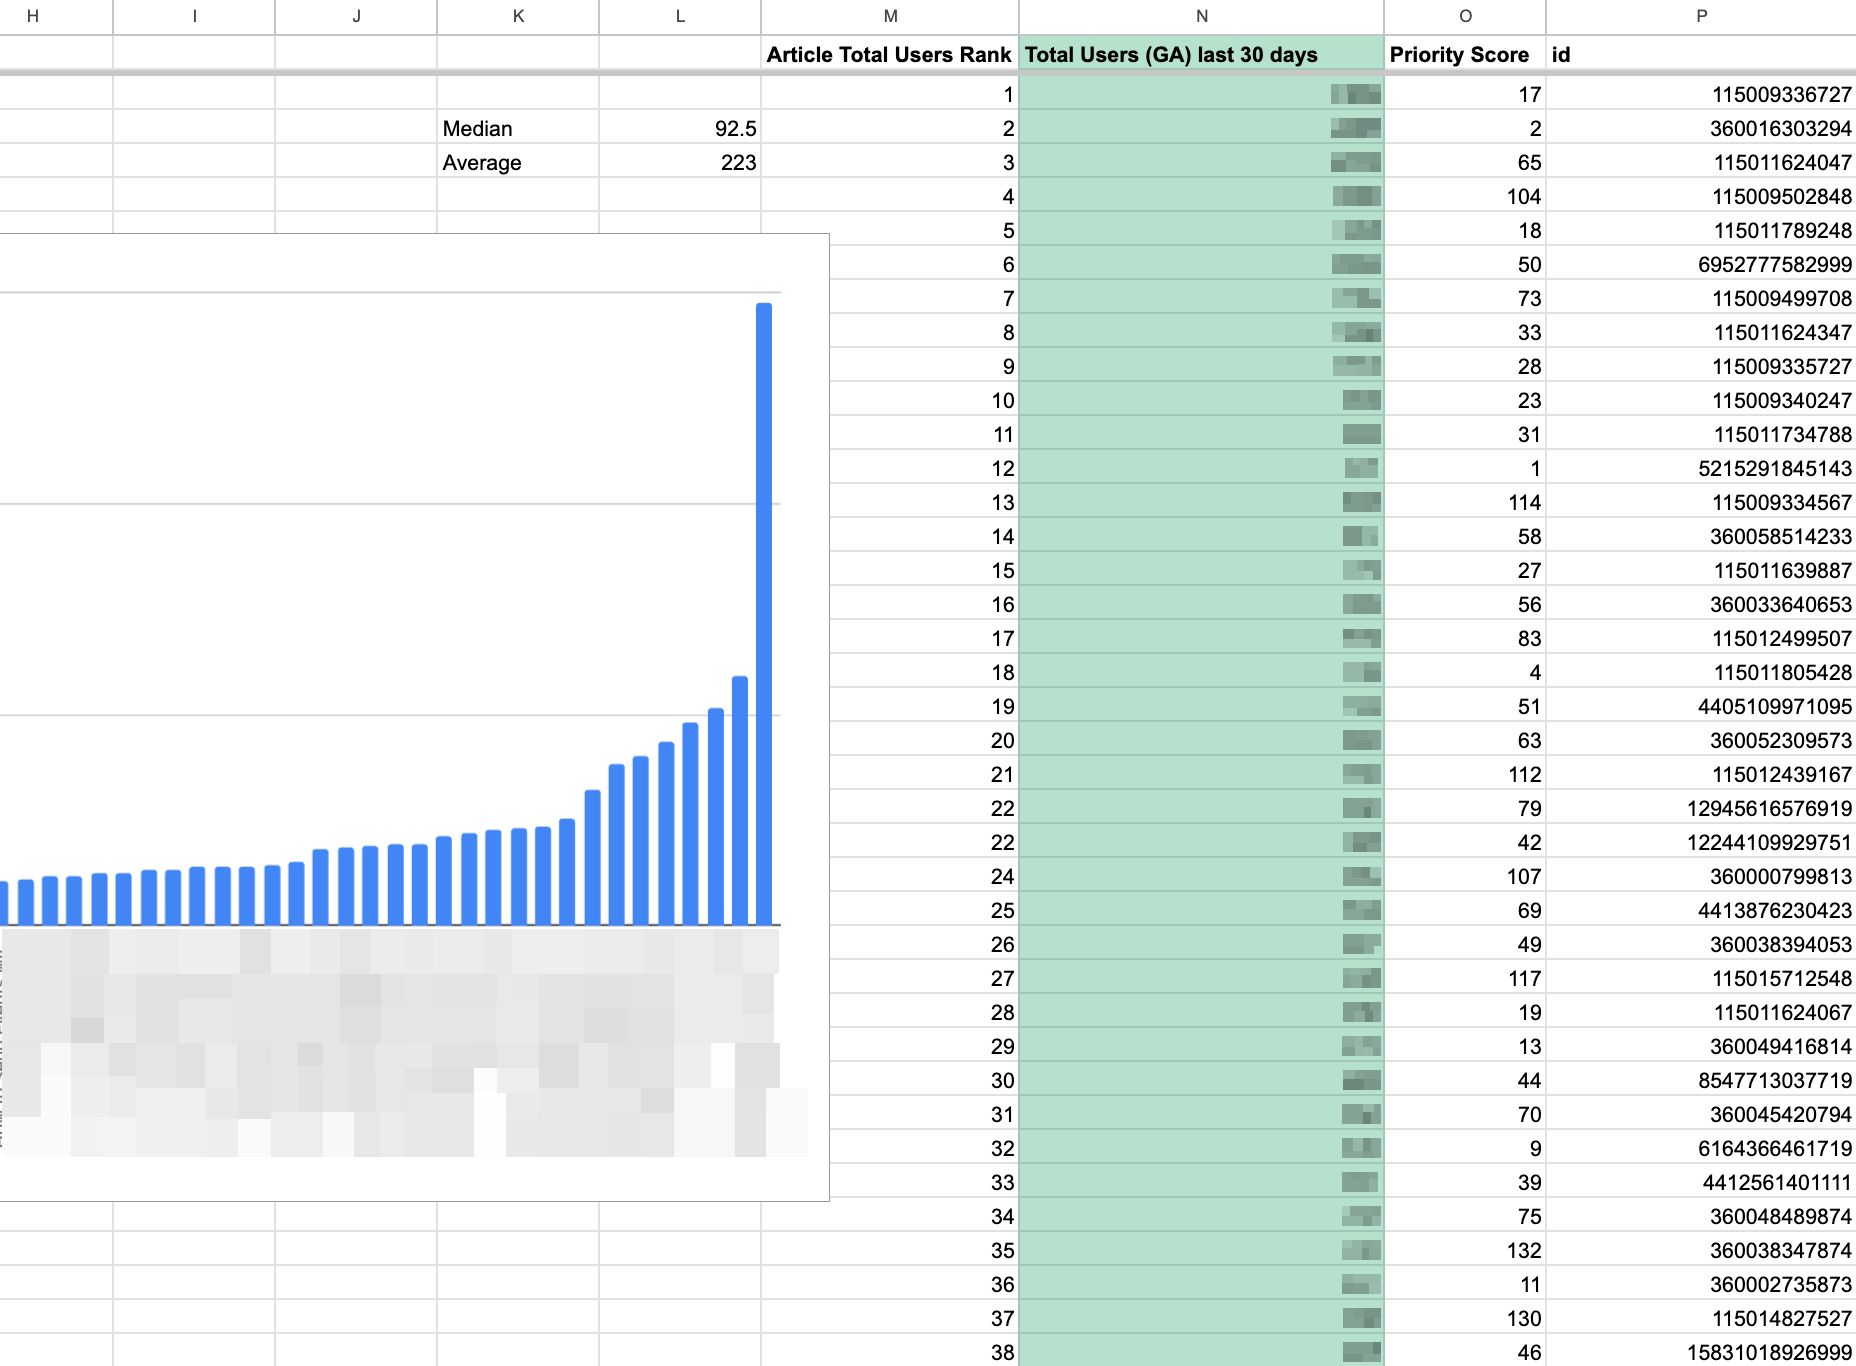 Google Sheet showing a sorted table of Total Users according to Google Analytics, to monitor which Help Center articles receive the most traffic.